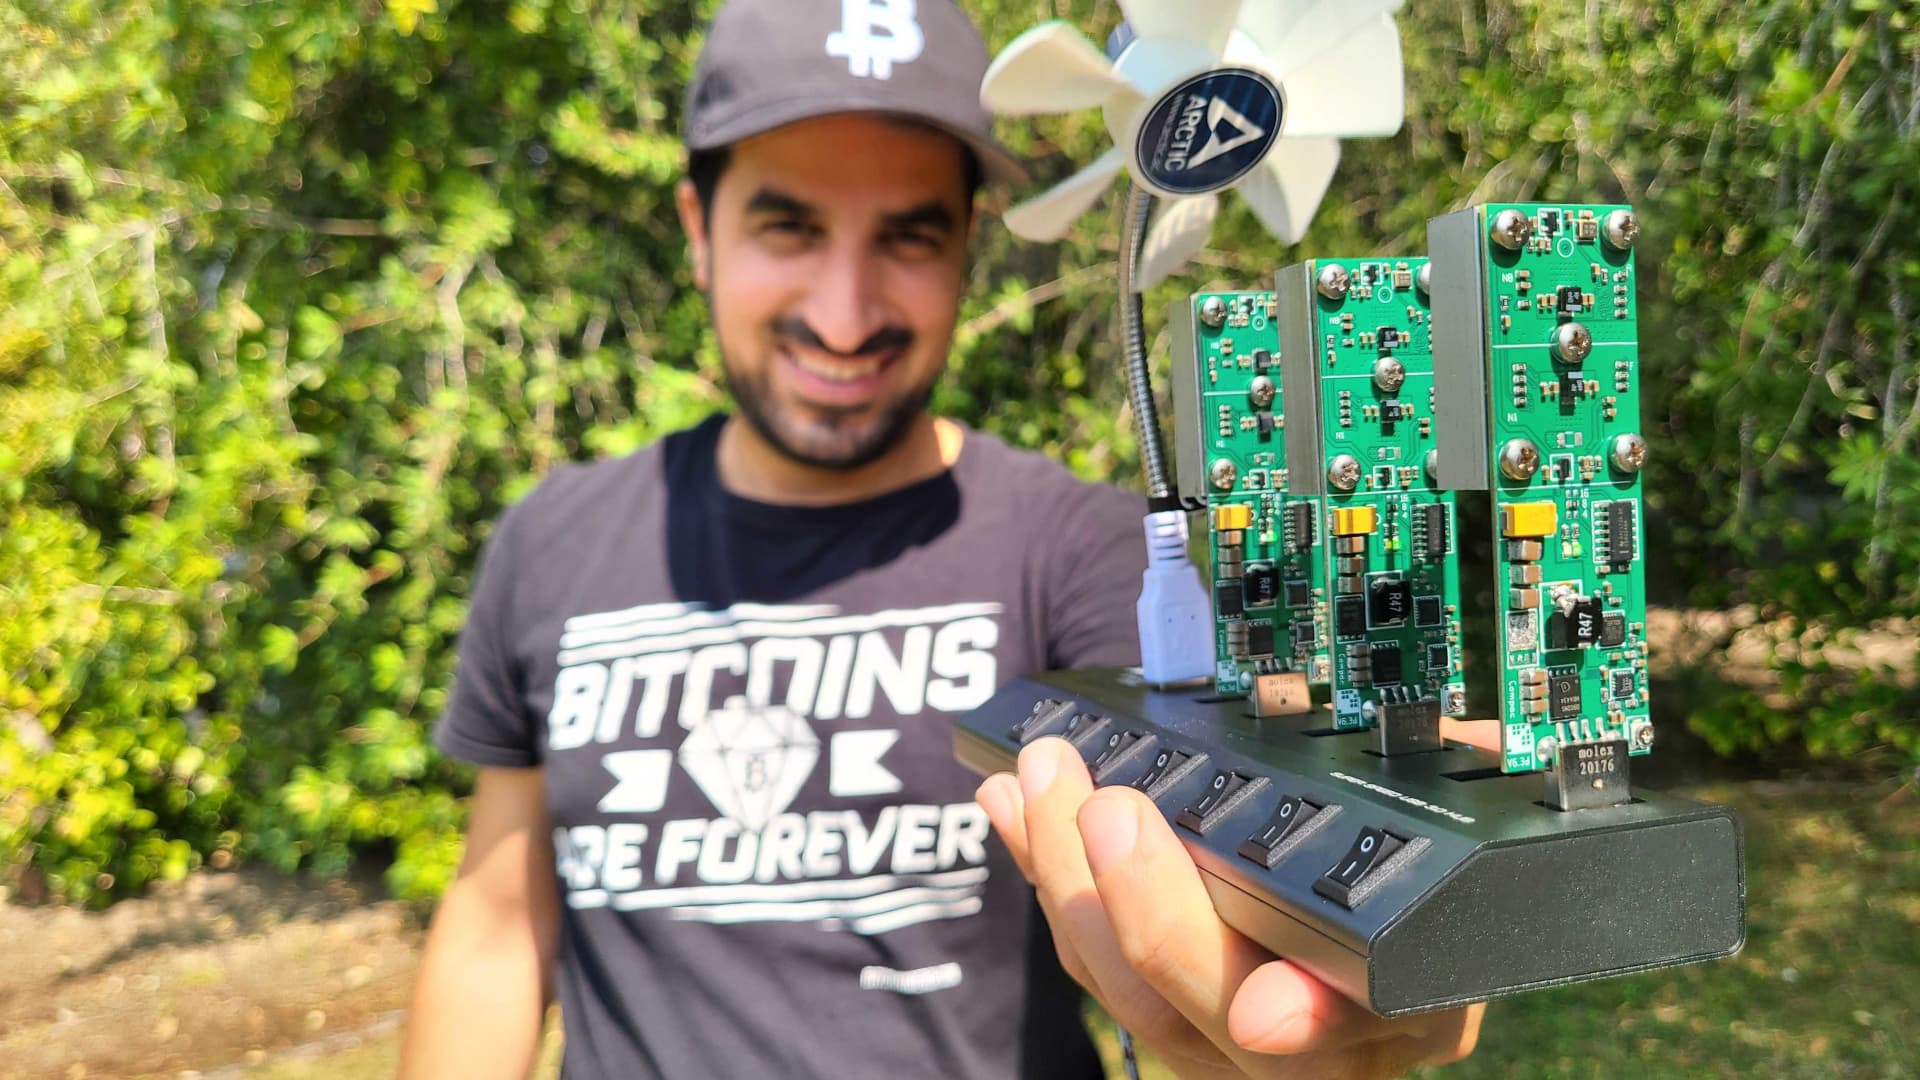 The owner of this tiny $875 rig mines bitcoin using free electricity at Starbucks